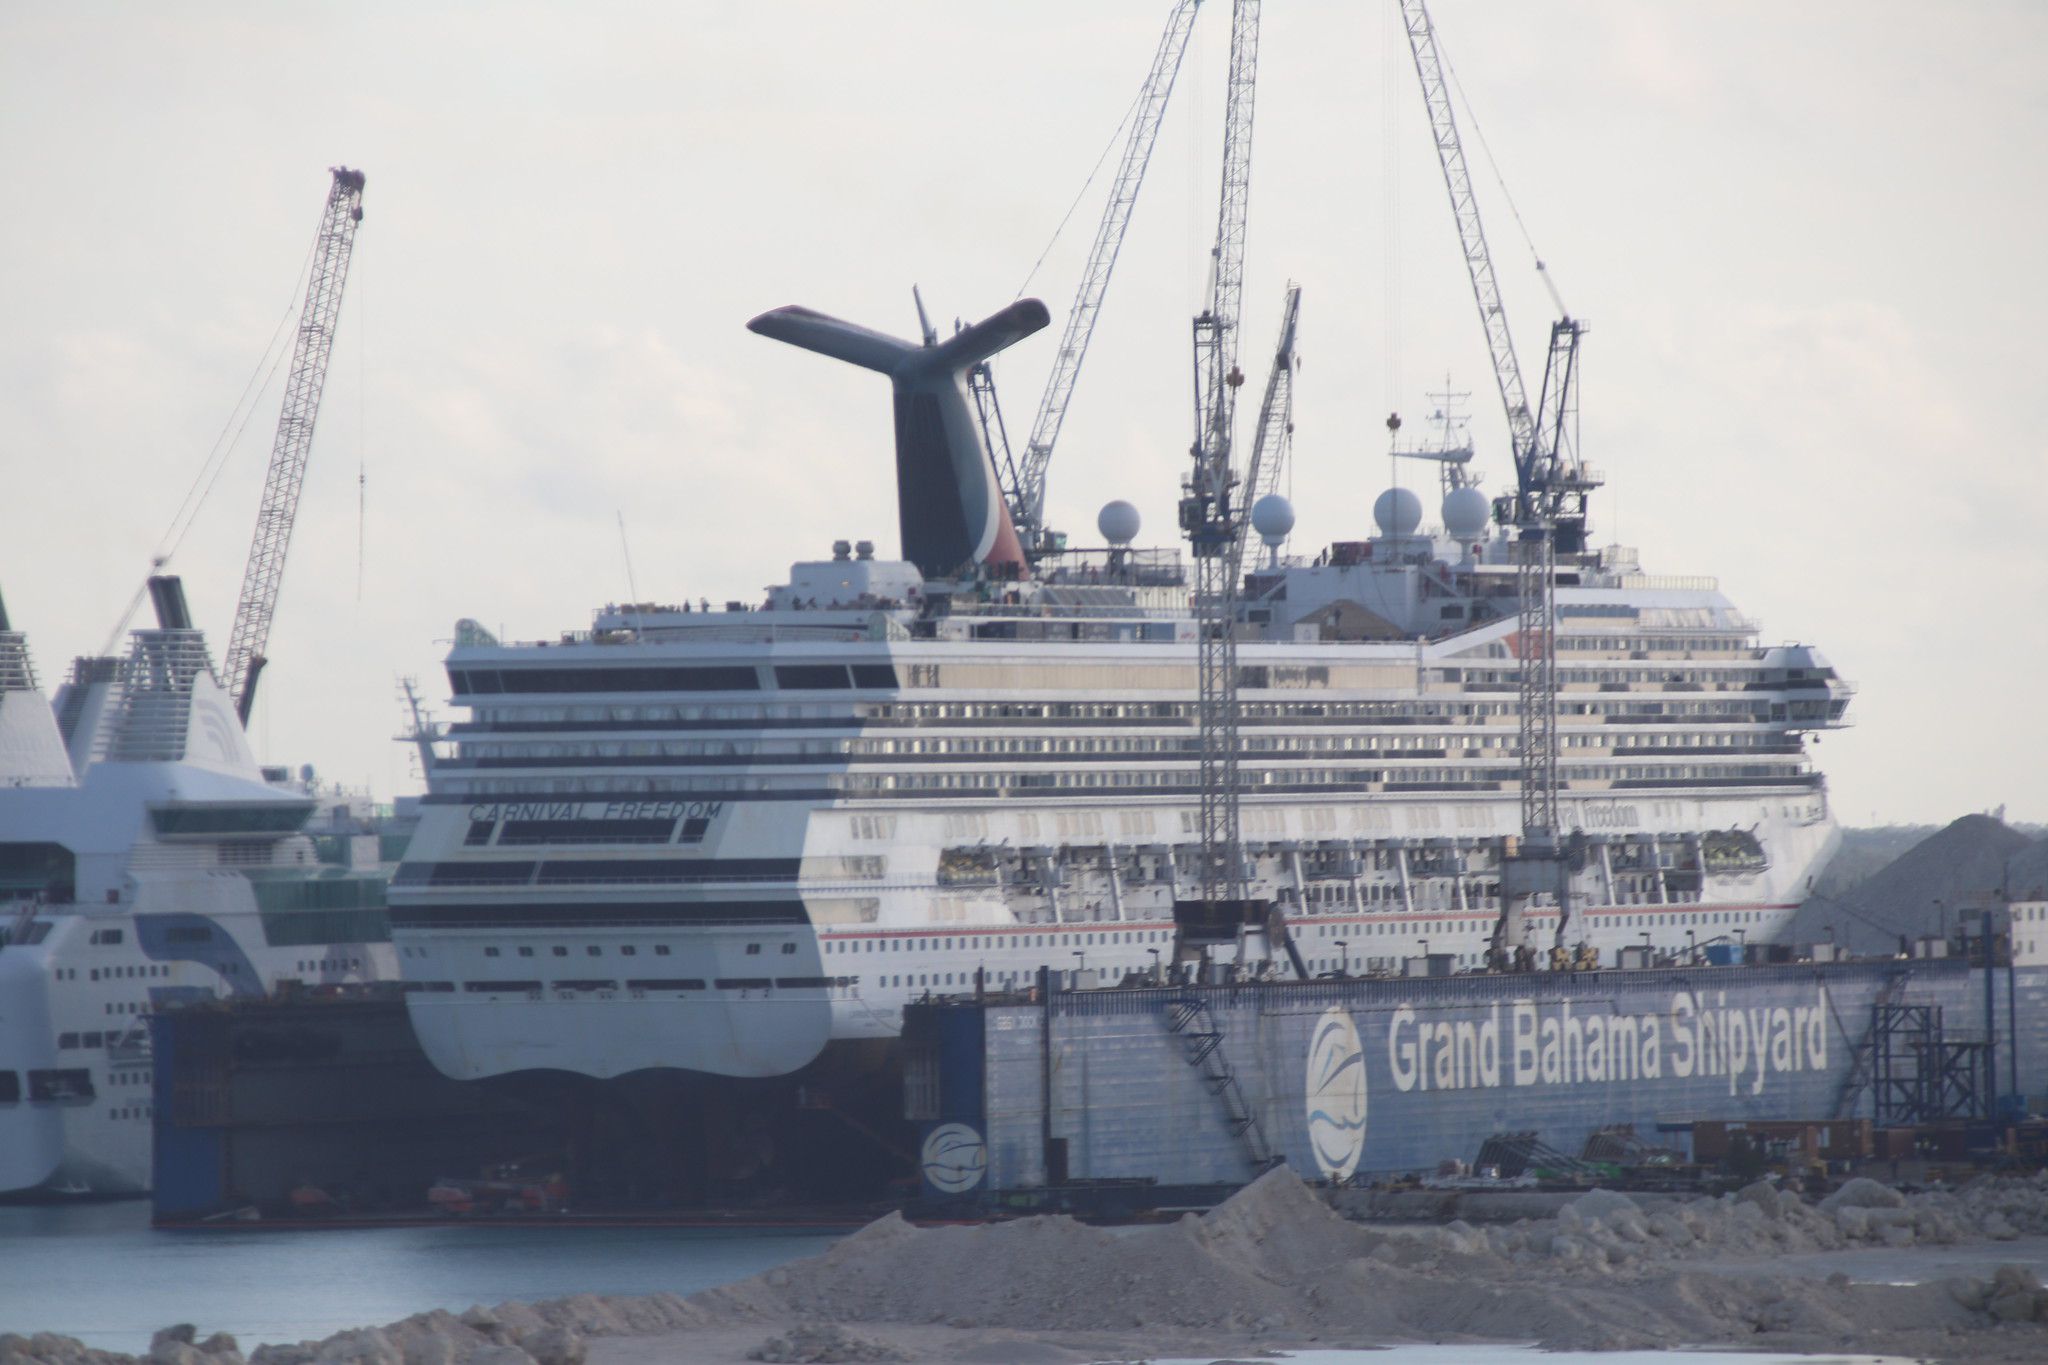 <p>Sometimes cruise ship construction hits snags and delays. Rather than delaying the ship’s maiden voyage date, some ships head out to sea <a href="https://www.cruisecritic.com/articles.cfm?ID=2024">before they’re completely finished</a>. In these instances, cruise lines bring workers along for the trip, and they might block off staterooms to house those workers. Workers often complete jobs like restaurant building or finishing cabins during the trip.</p>